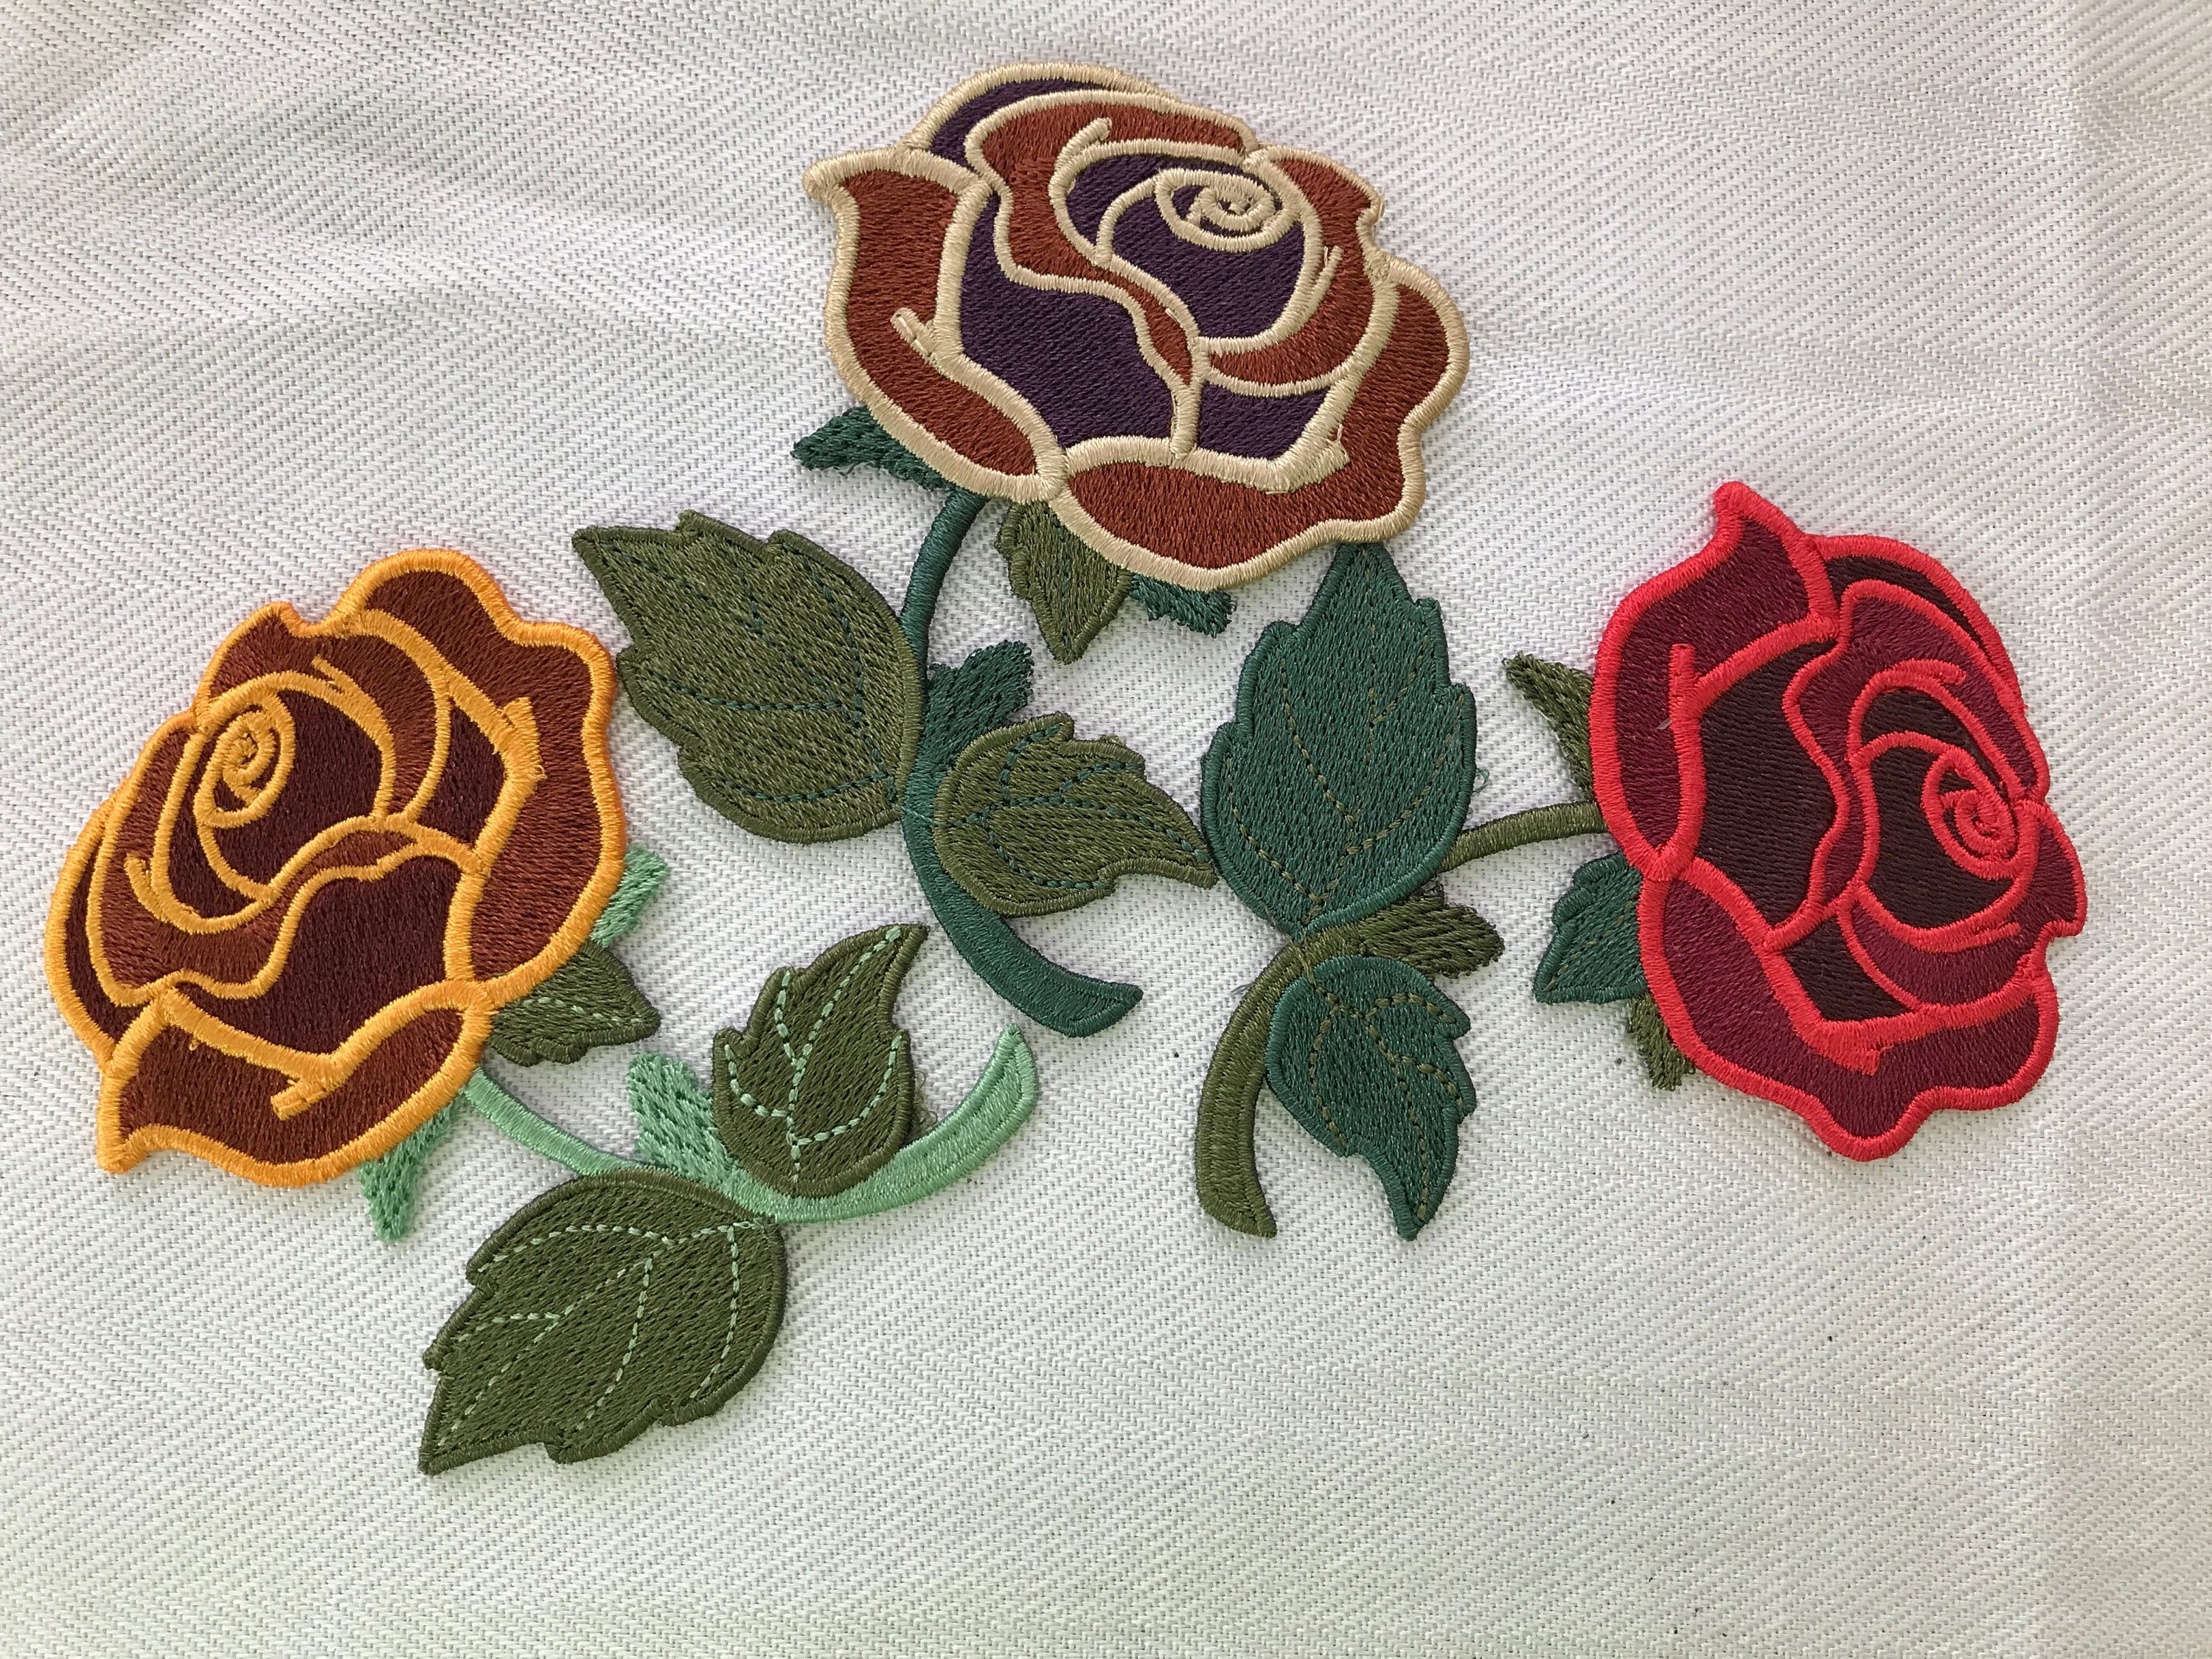 Rose Embroidery Pattern